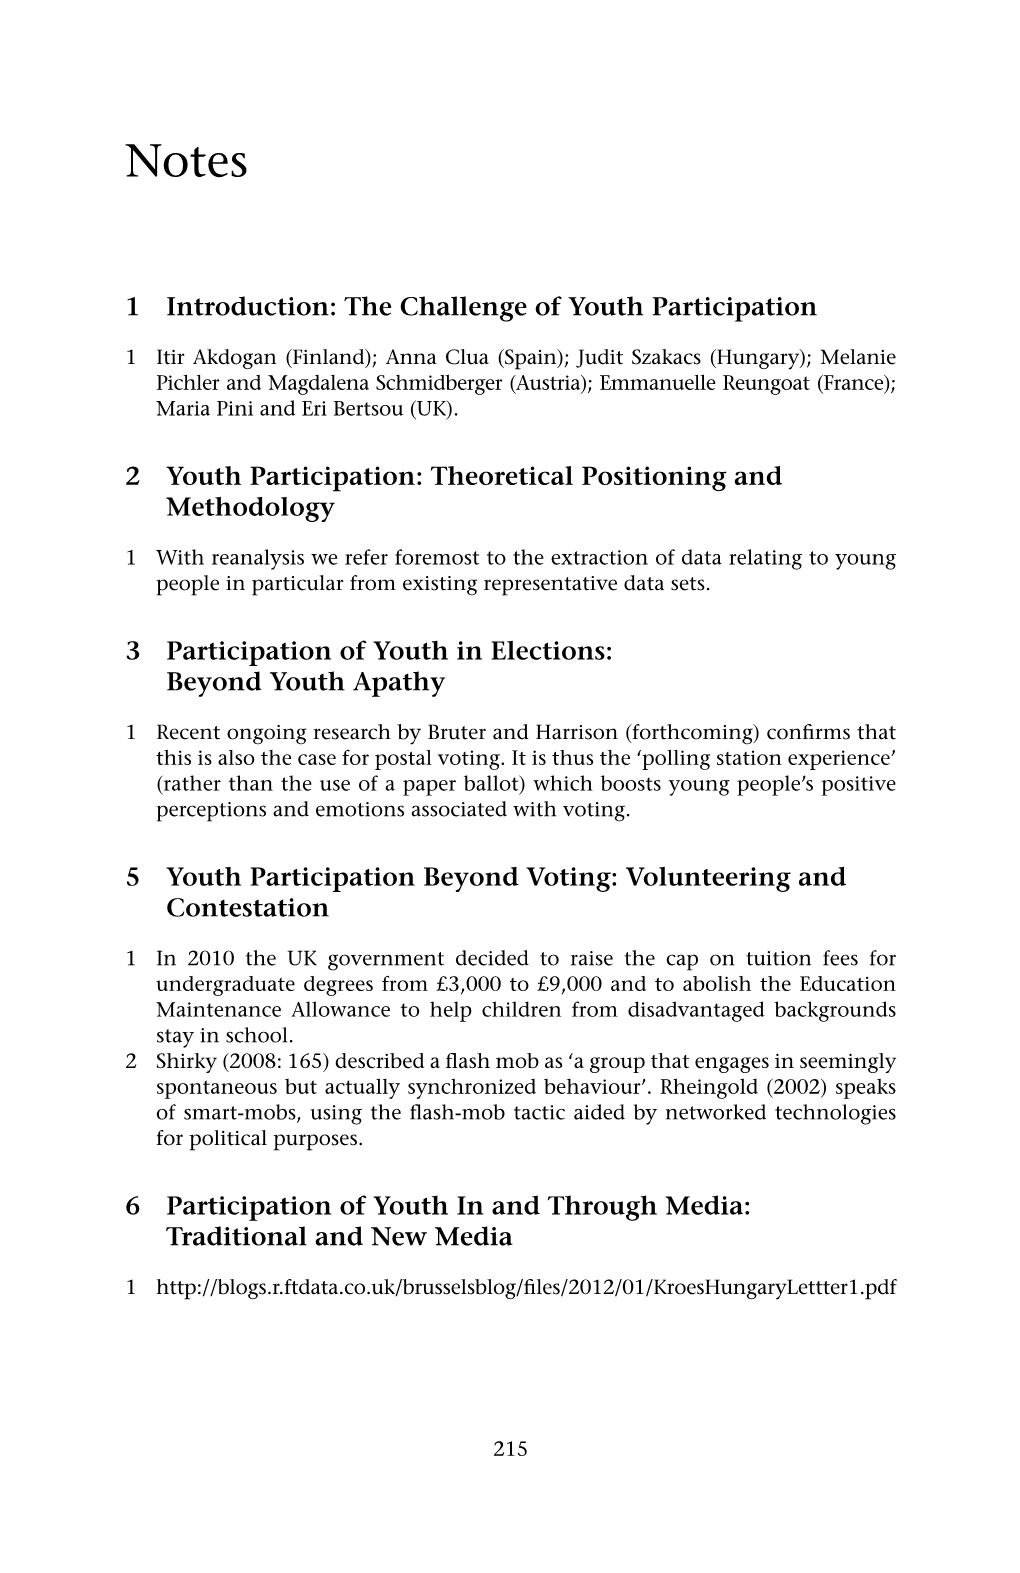 1 Introduction: the Challenge of Youth Participation 2 Youth Participation